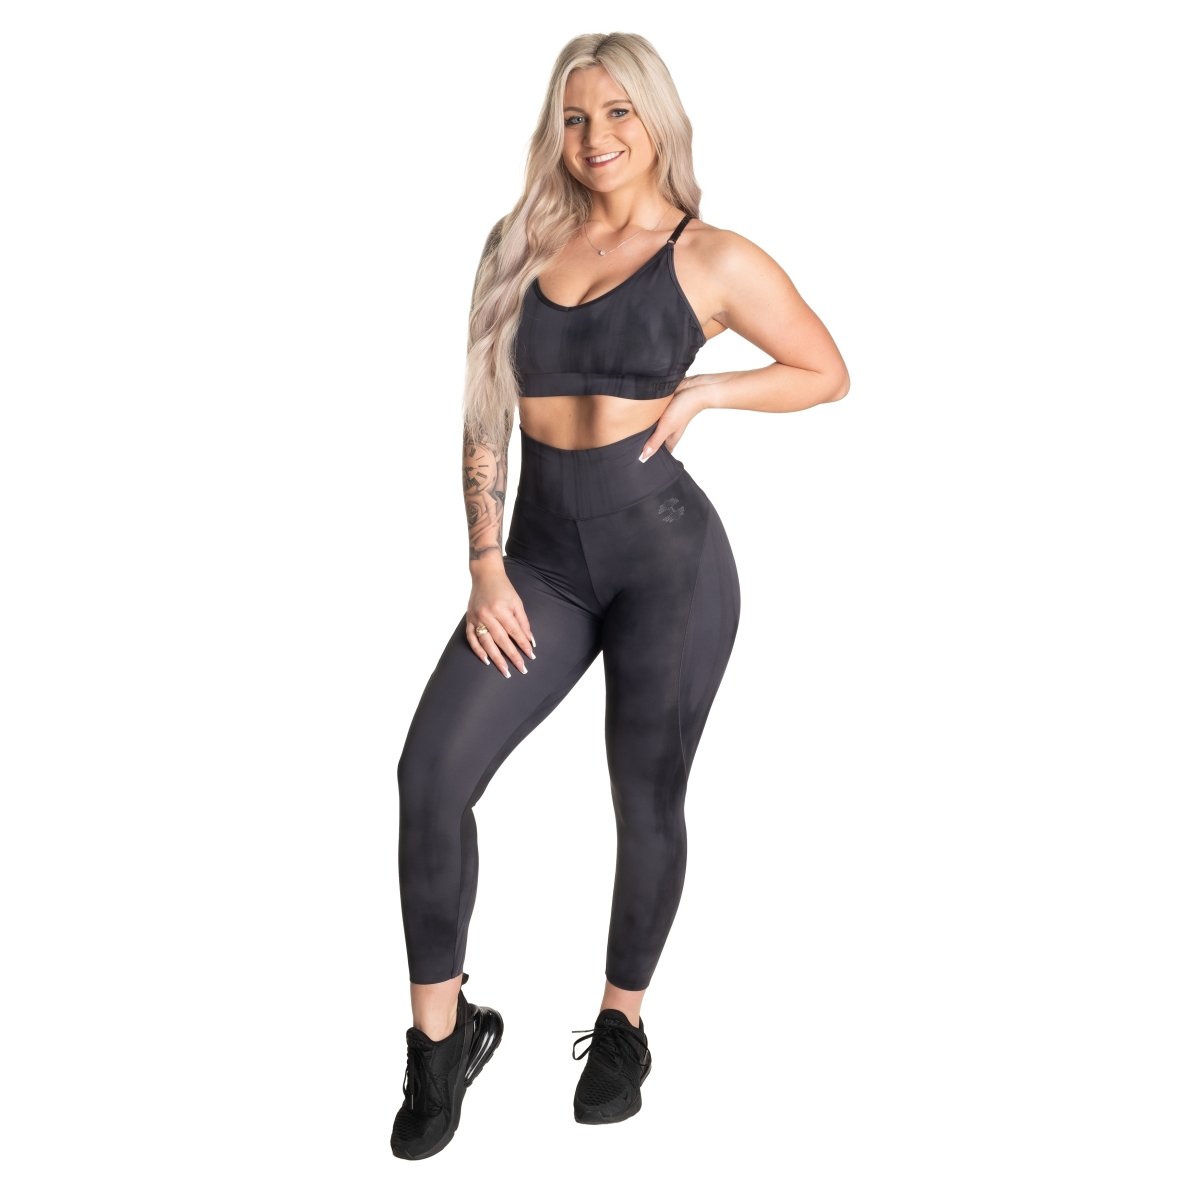 CHILY FIT NEBBIA Fitness Leggings High Waist Performance - Black